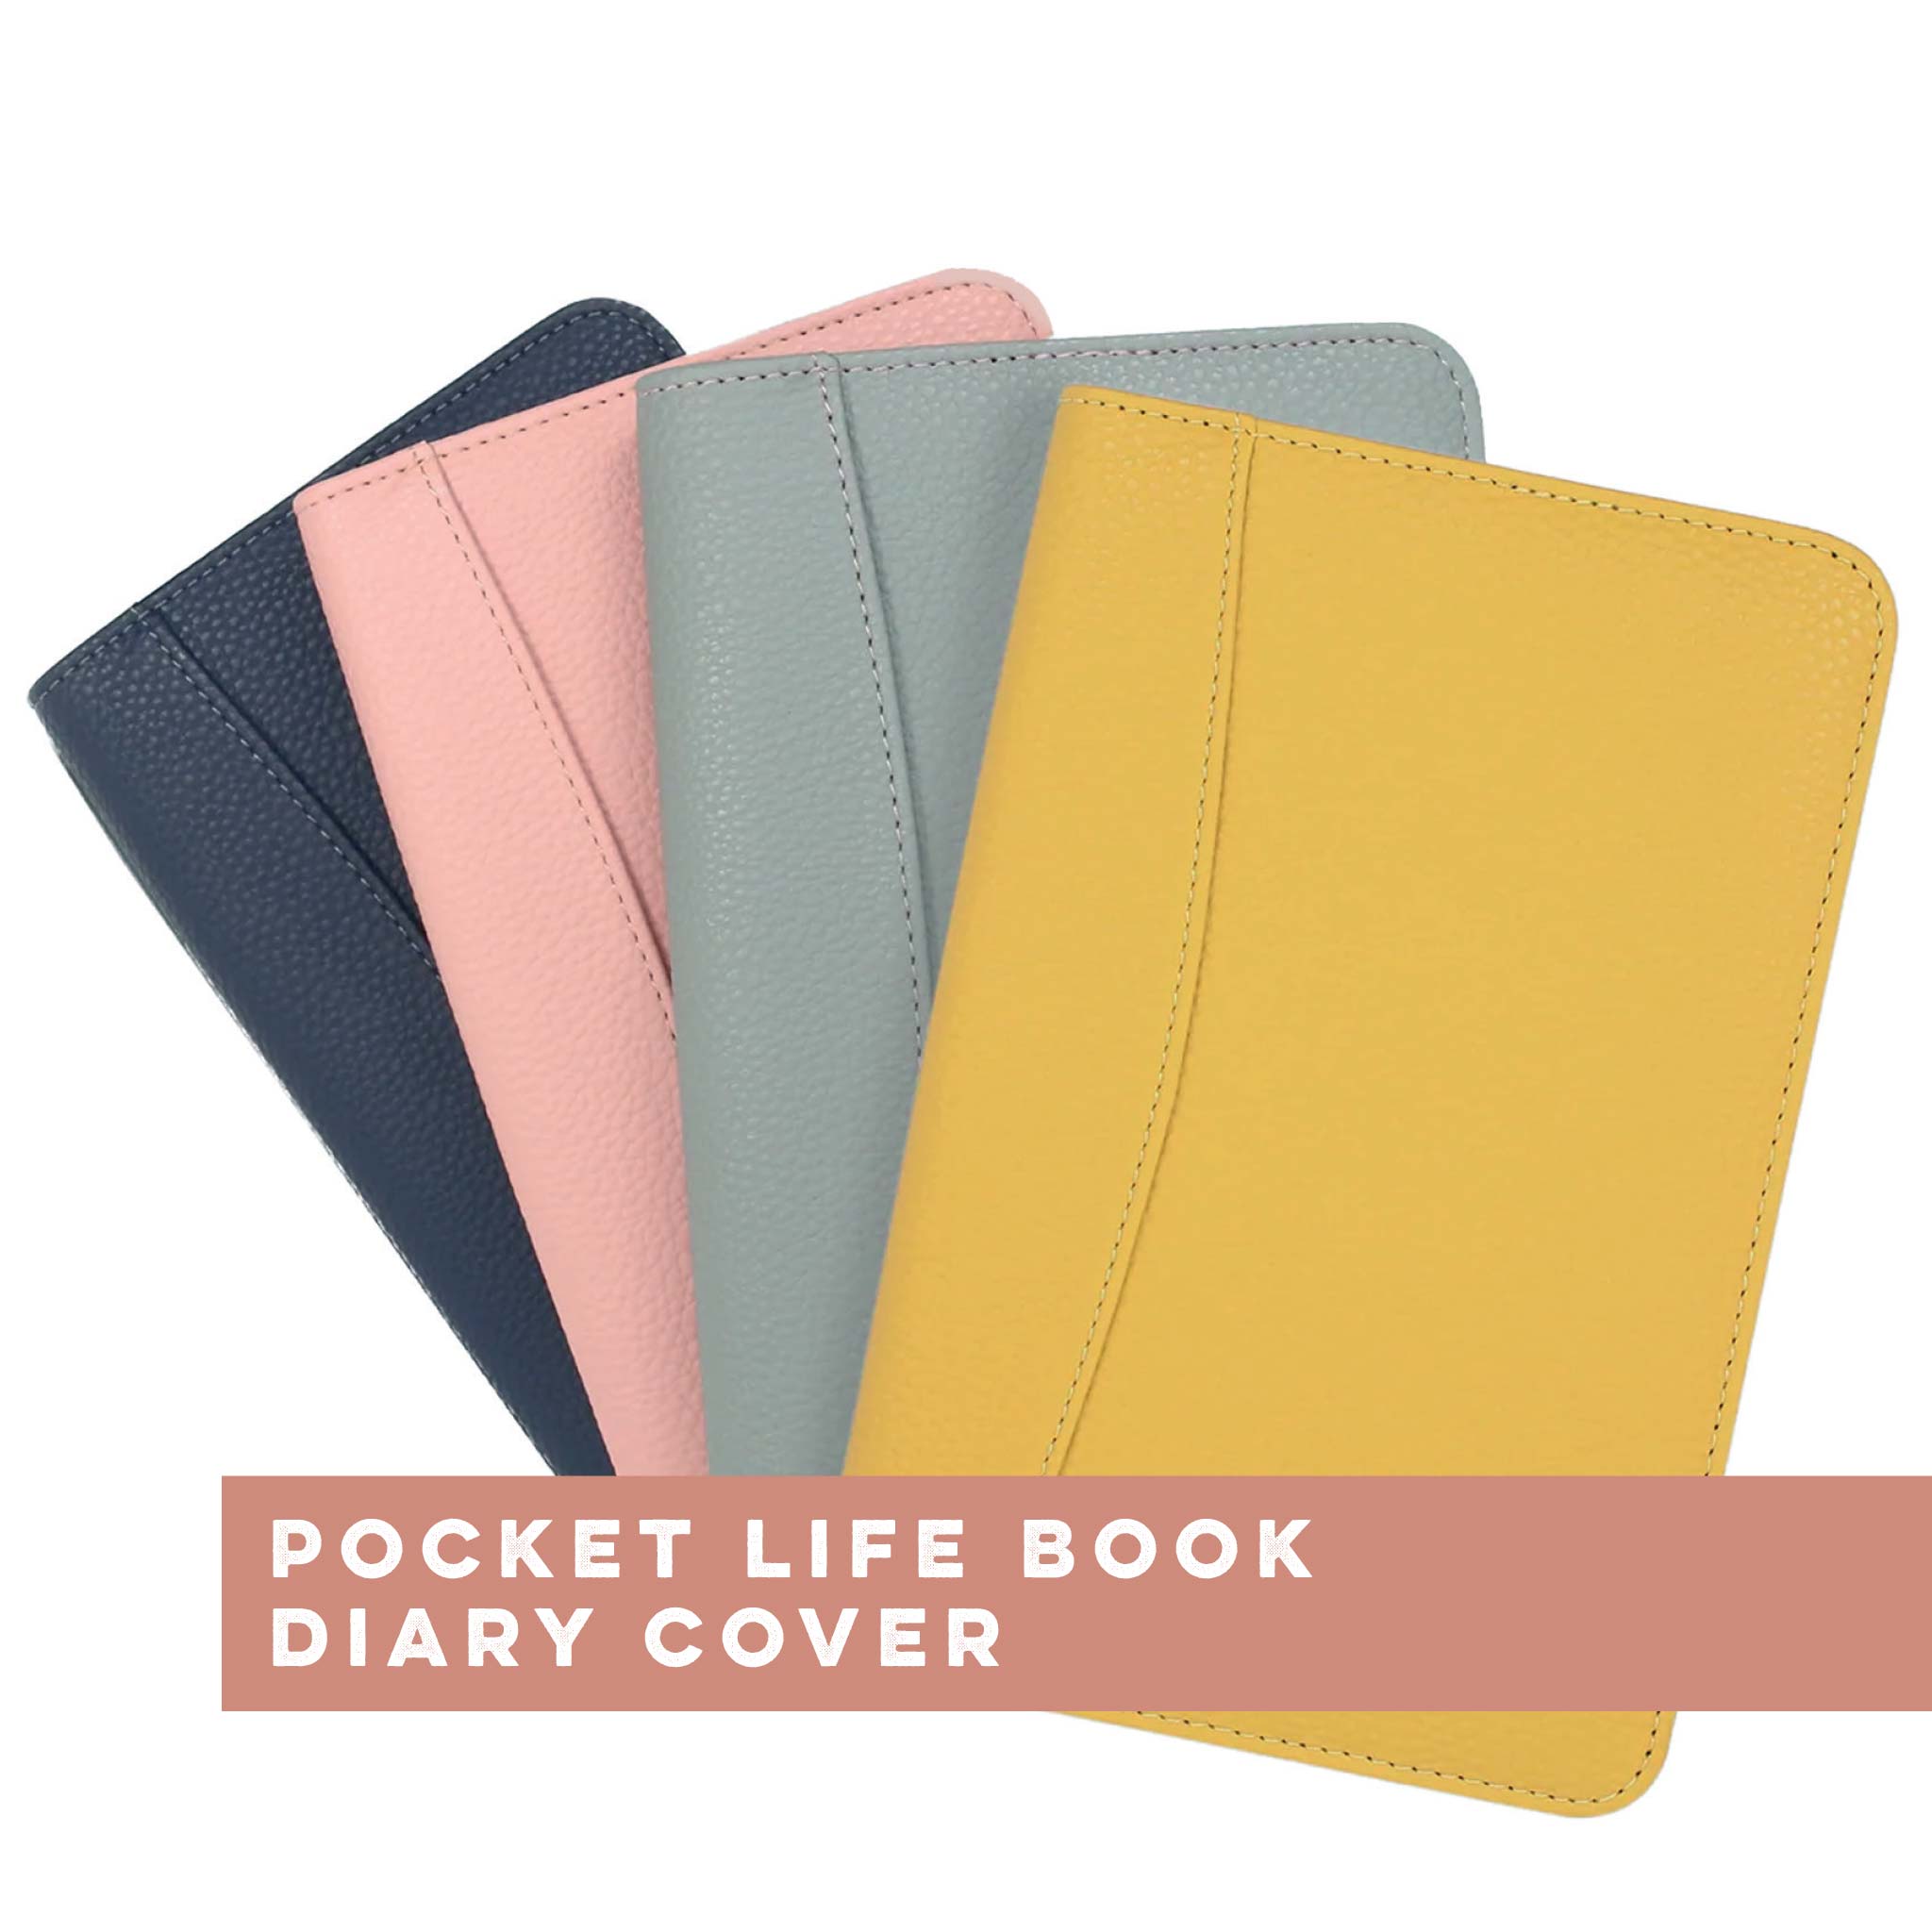 Pocket Life Book Diary Cover I Full-Zip Slimline Cover with Pocket ...